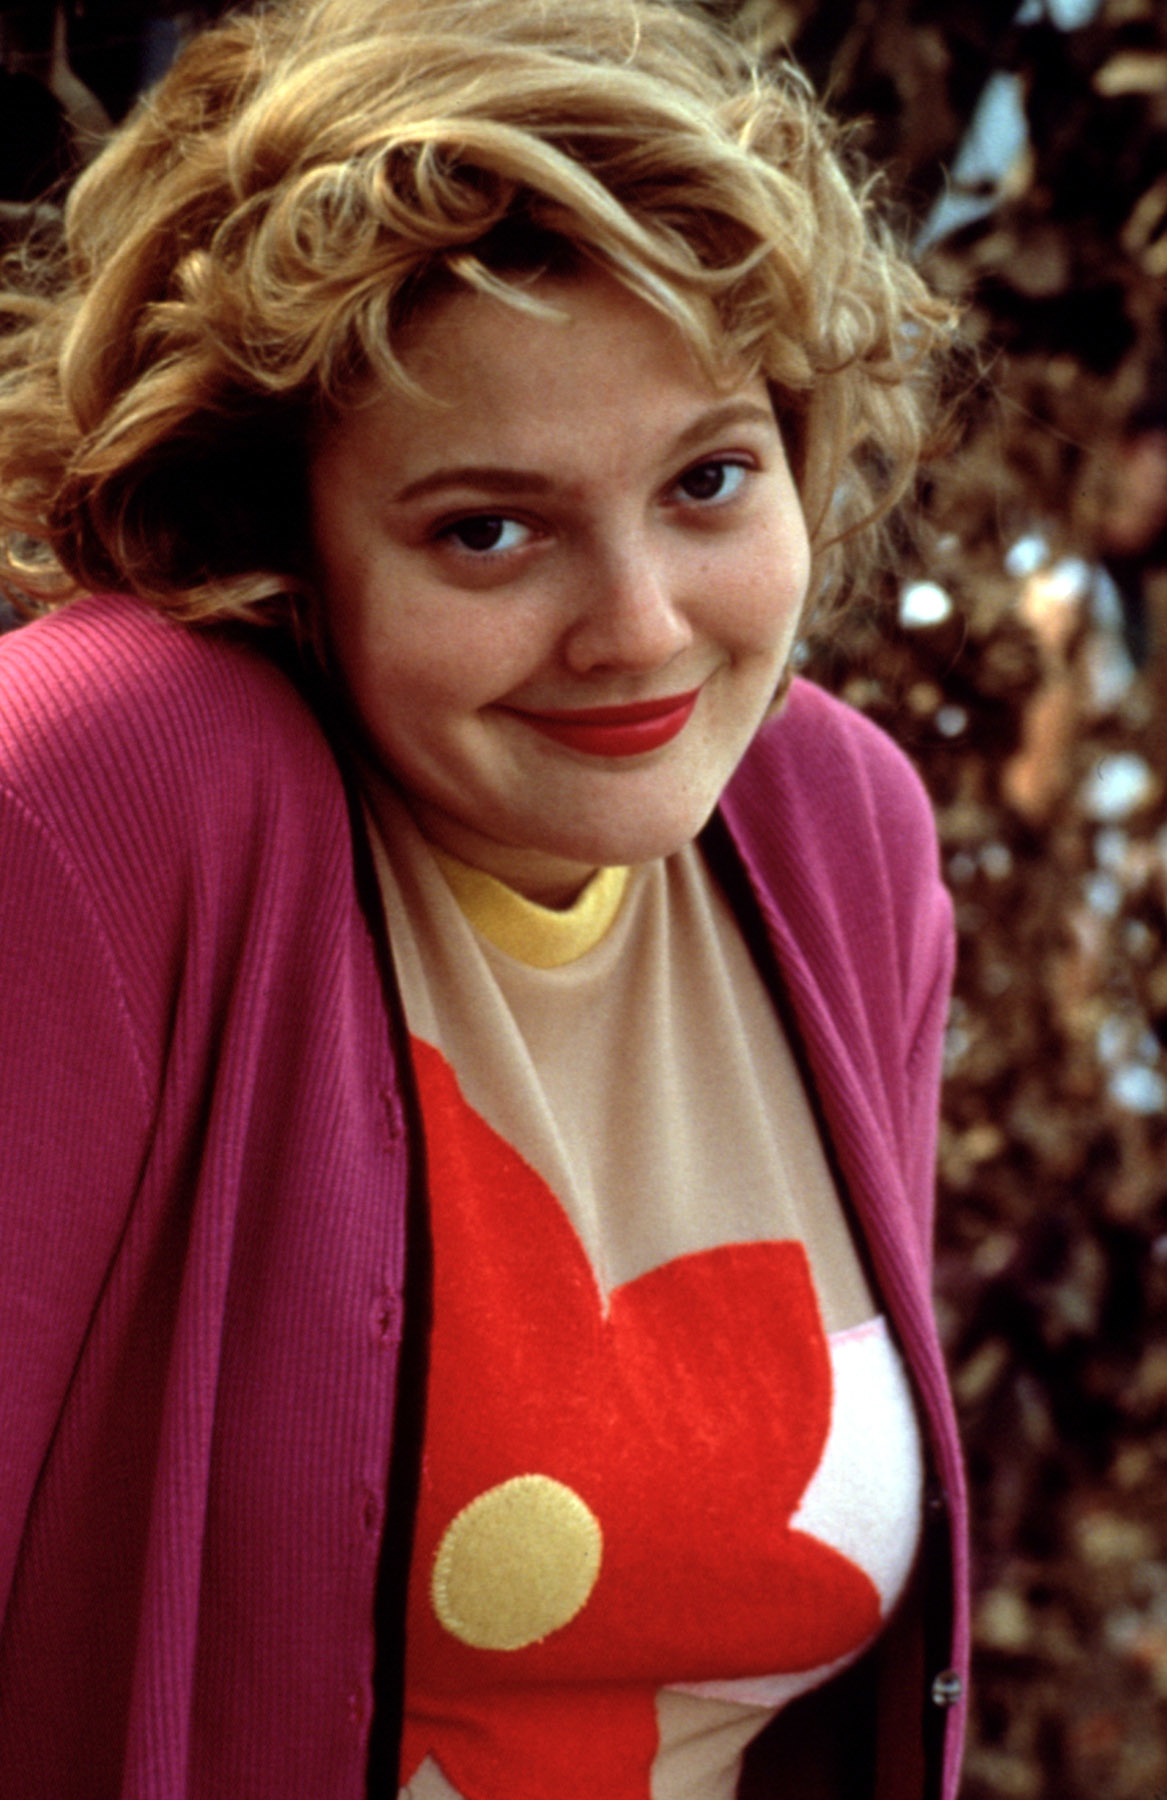 Drew Barrymore smiling, wearing a heart-patterned top and a cardigan